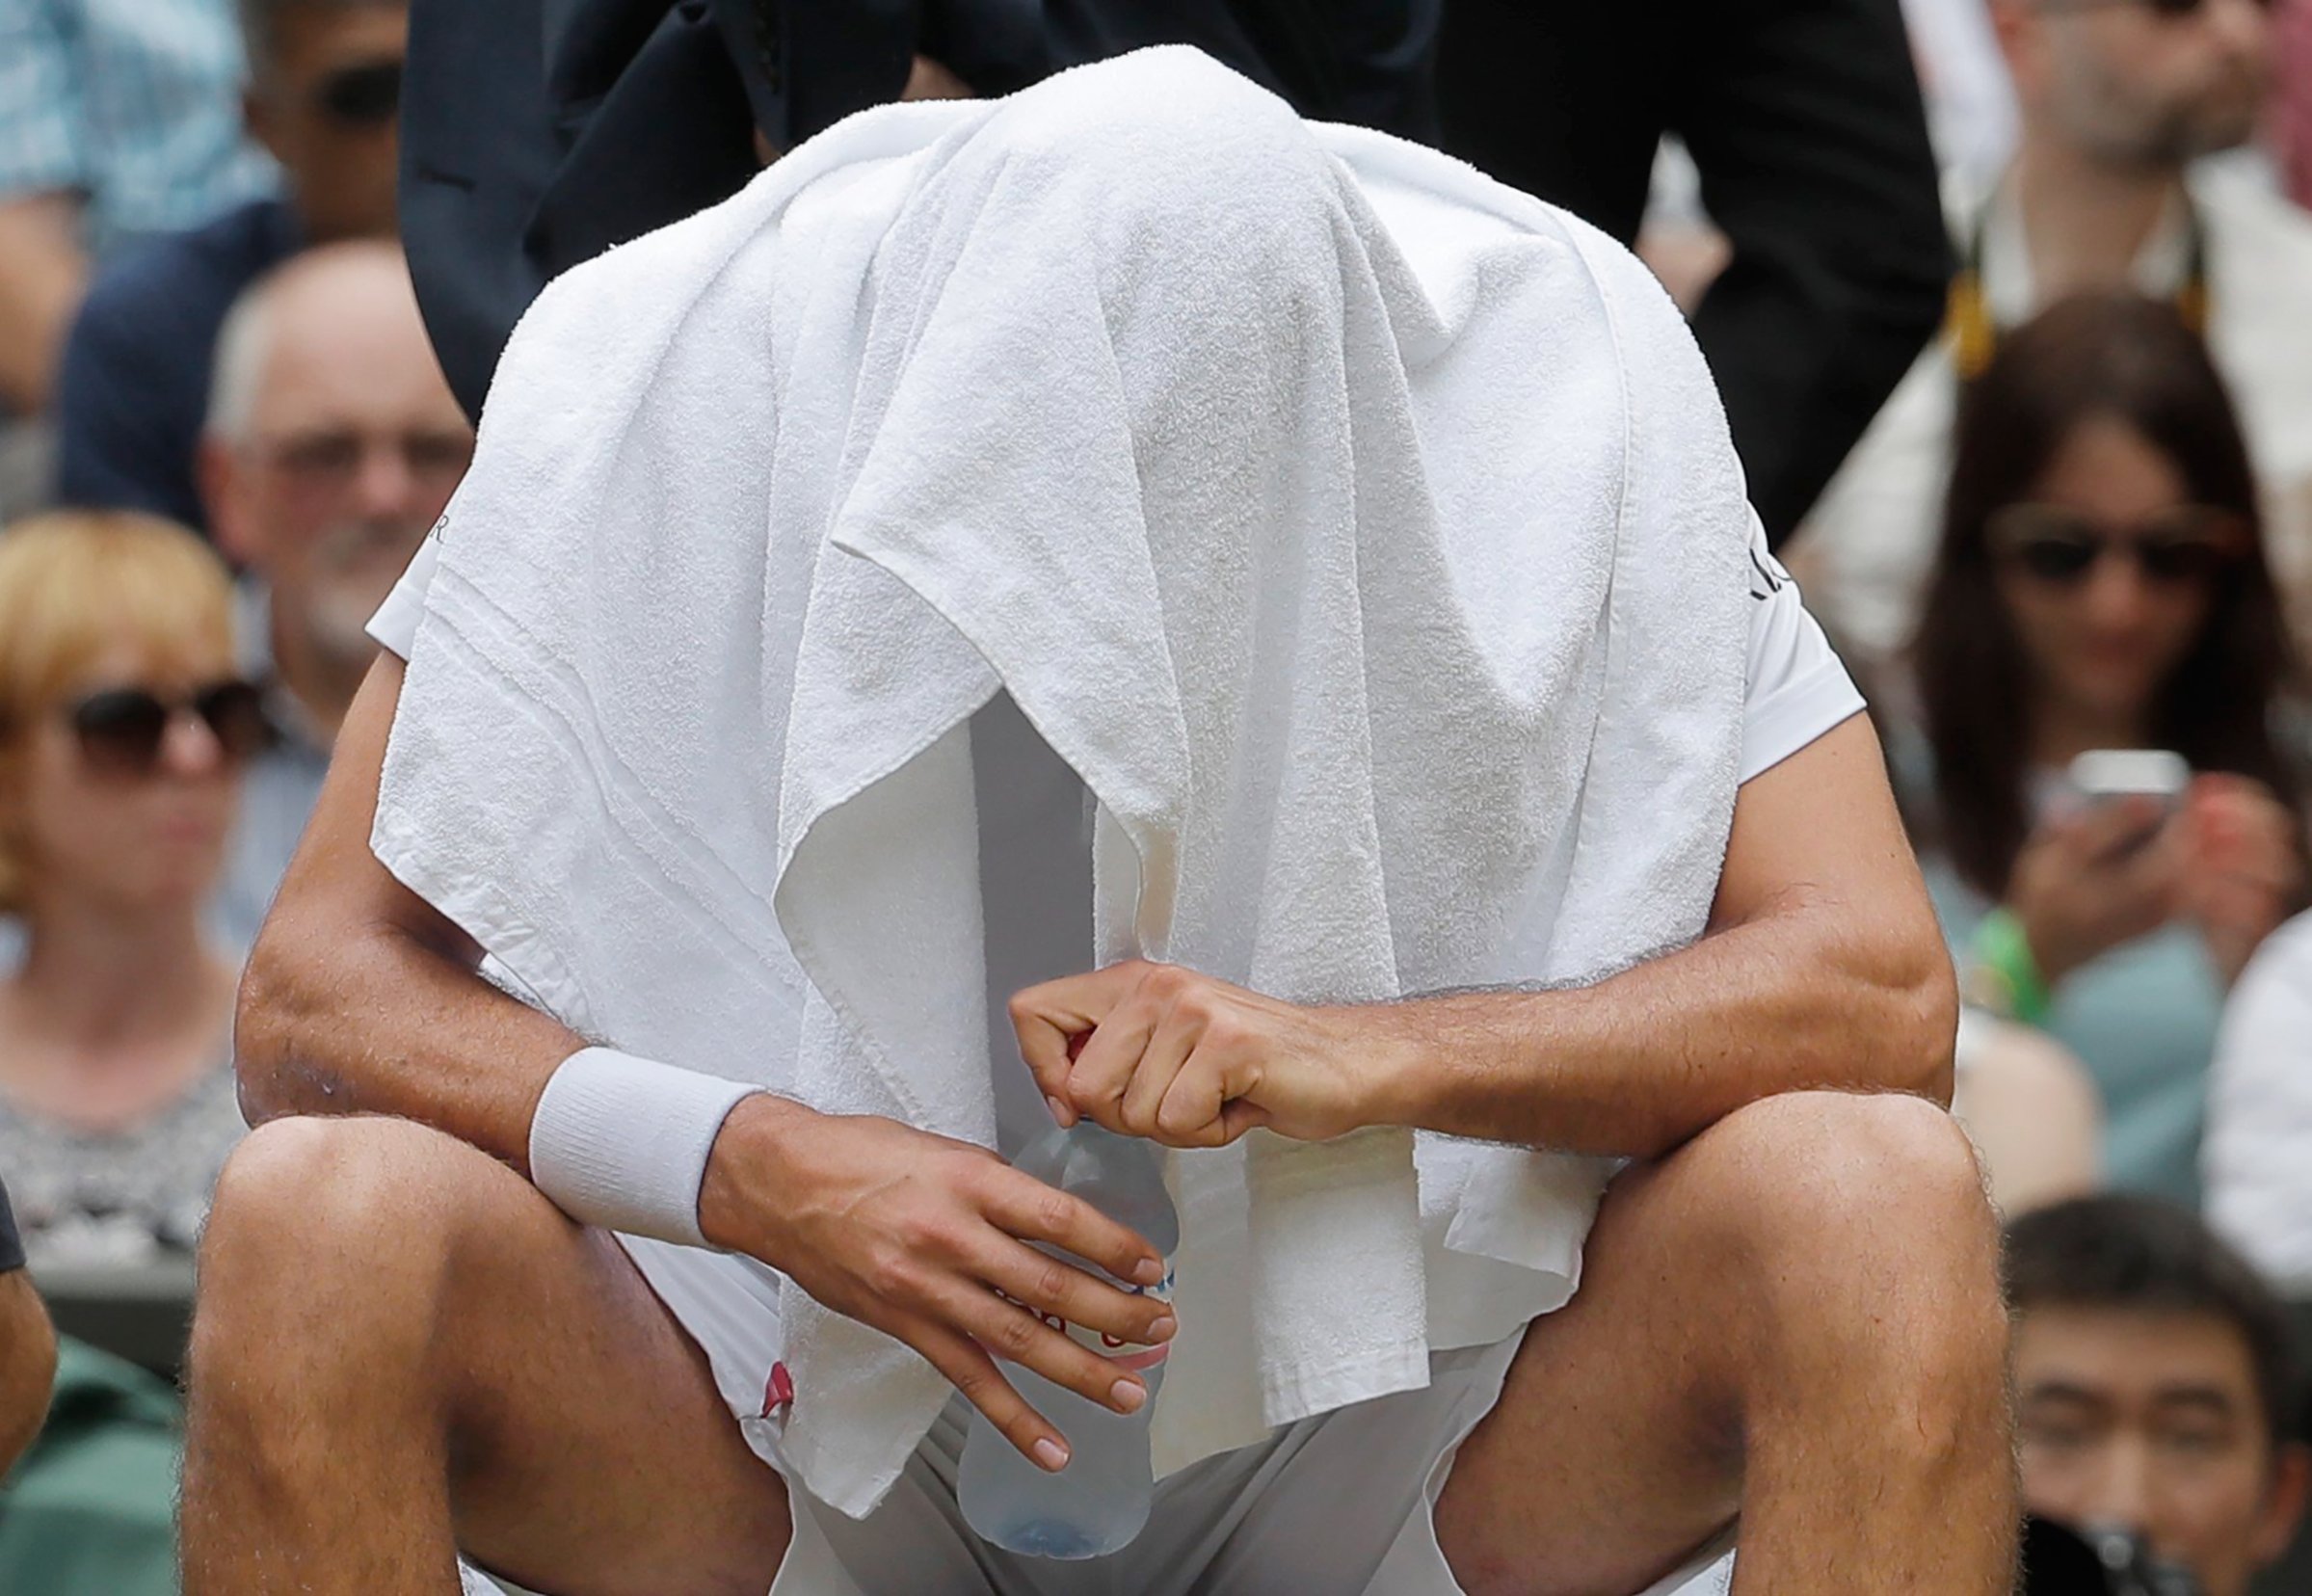 Marin Cilic broke down in tears during his loss to Roger Federer in the July 16 Wimbledon men’s final